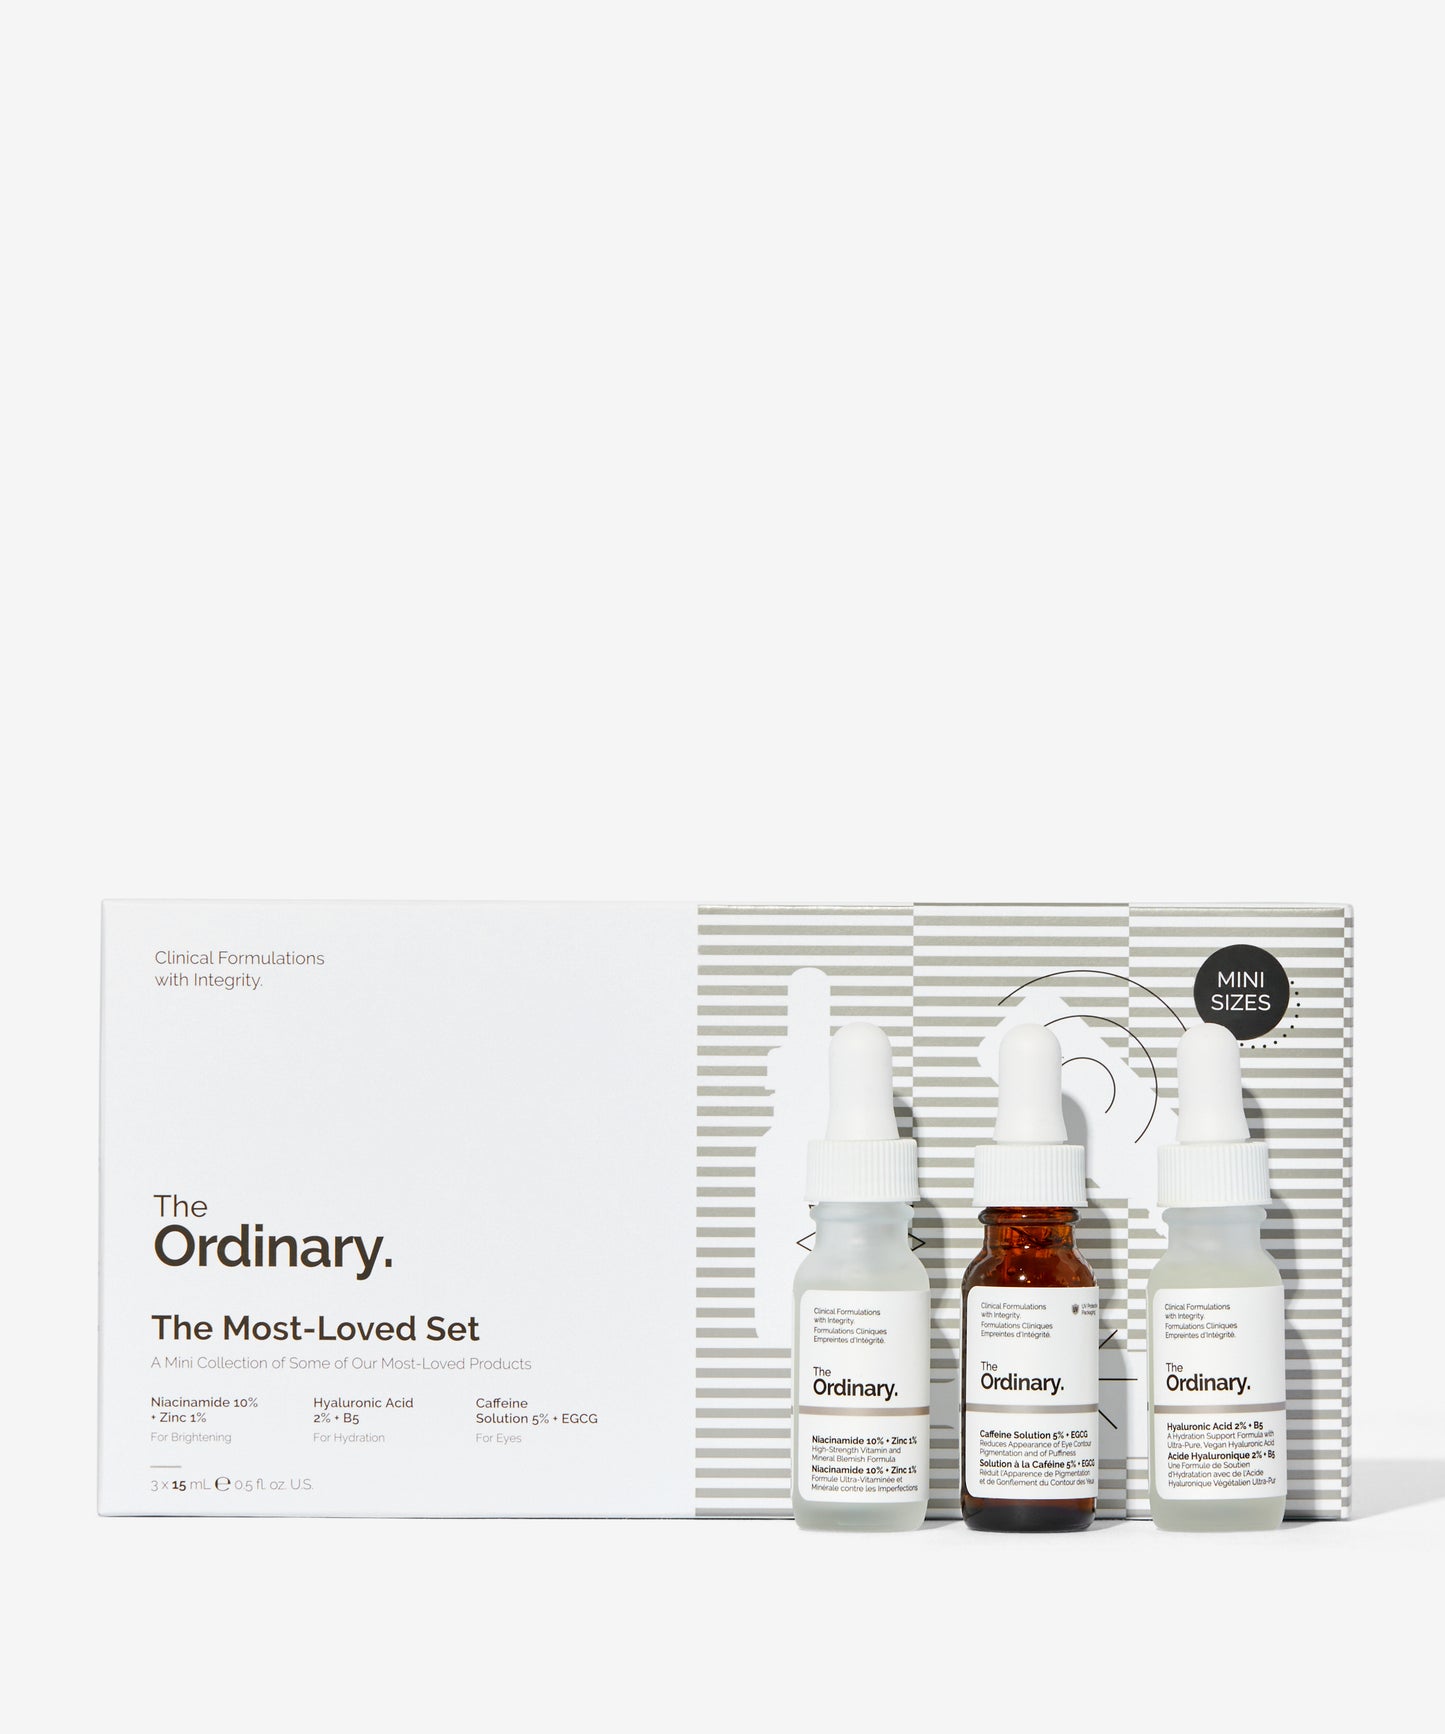 THE ORDINARY - The Most-Loved Set